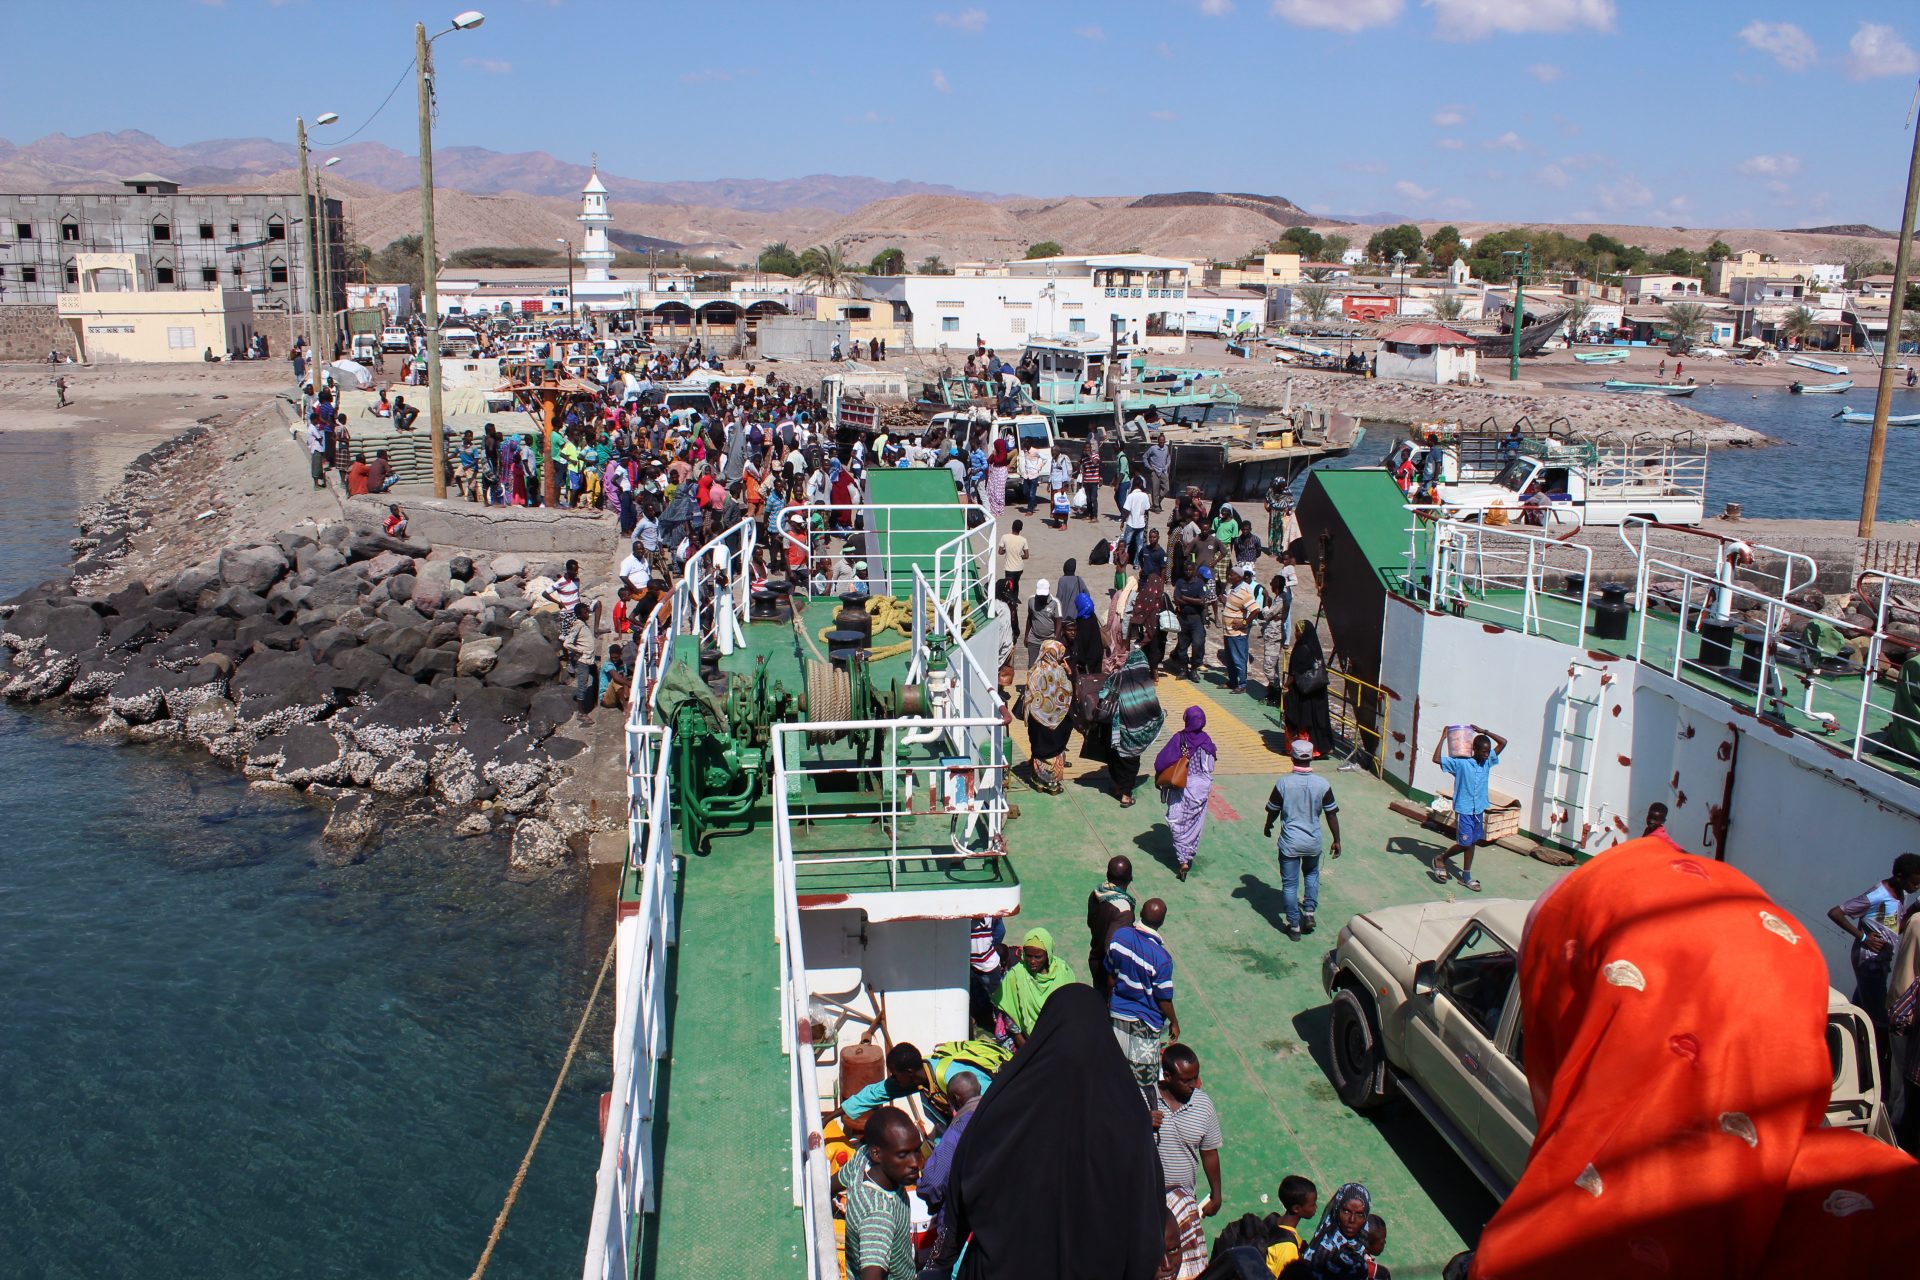 Tadjoura, DA colourful crowd of people spills off the ferry as it reaches the port of Tadjoura